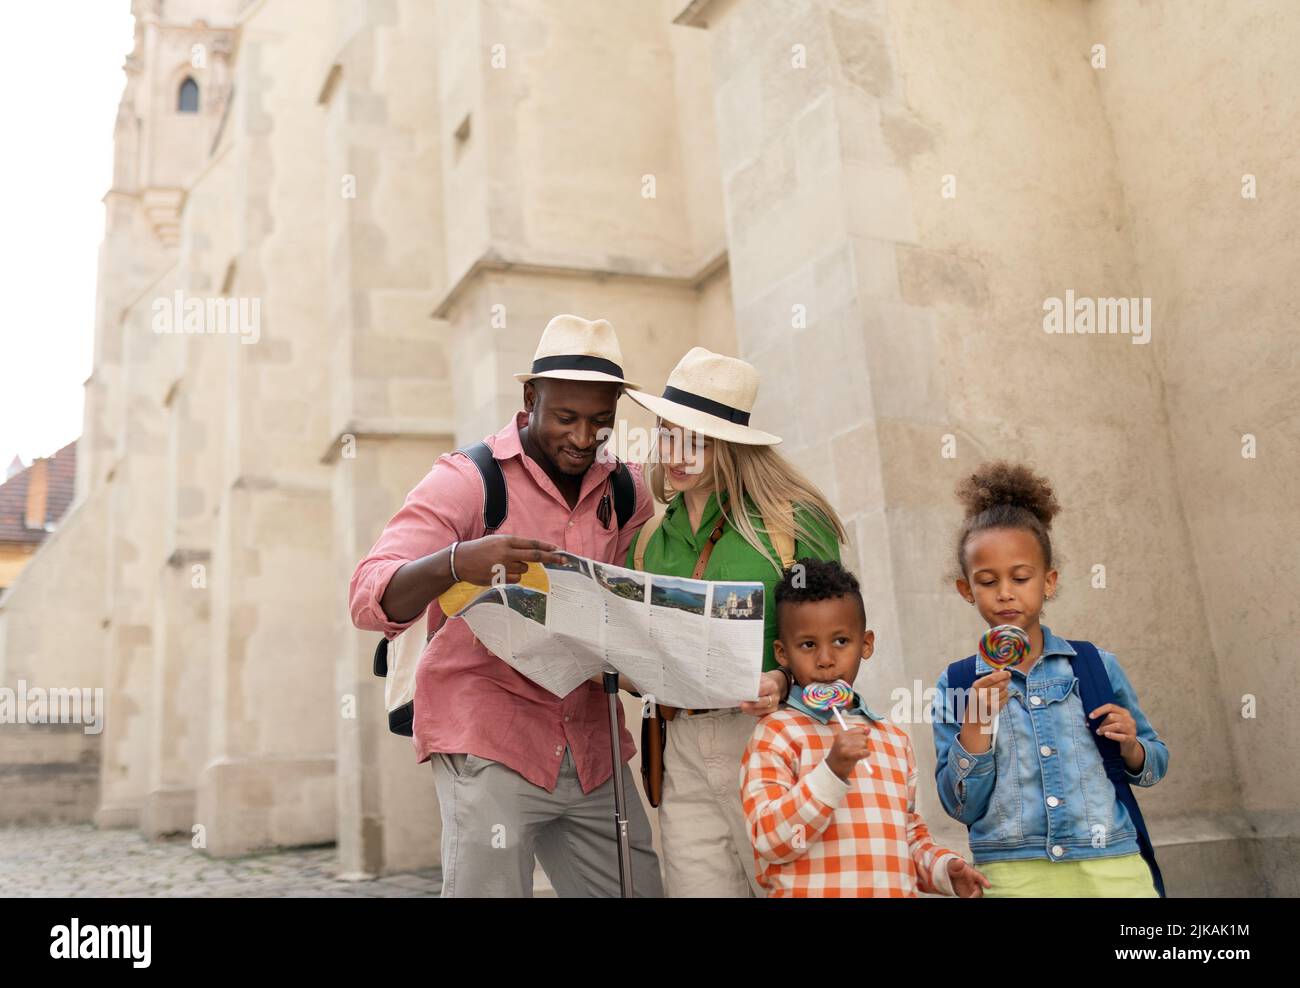 Multiracial family travel together in old city centre, looking at map. Stock Photo